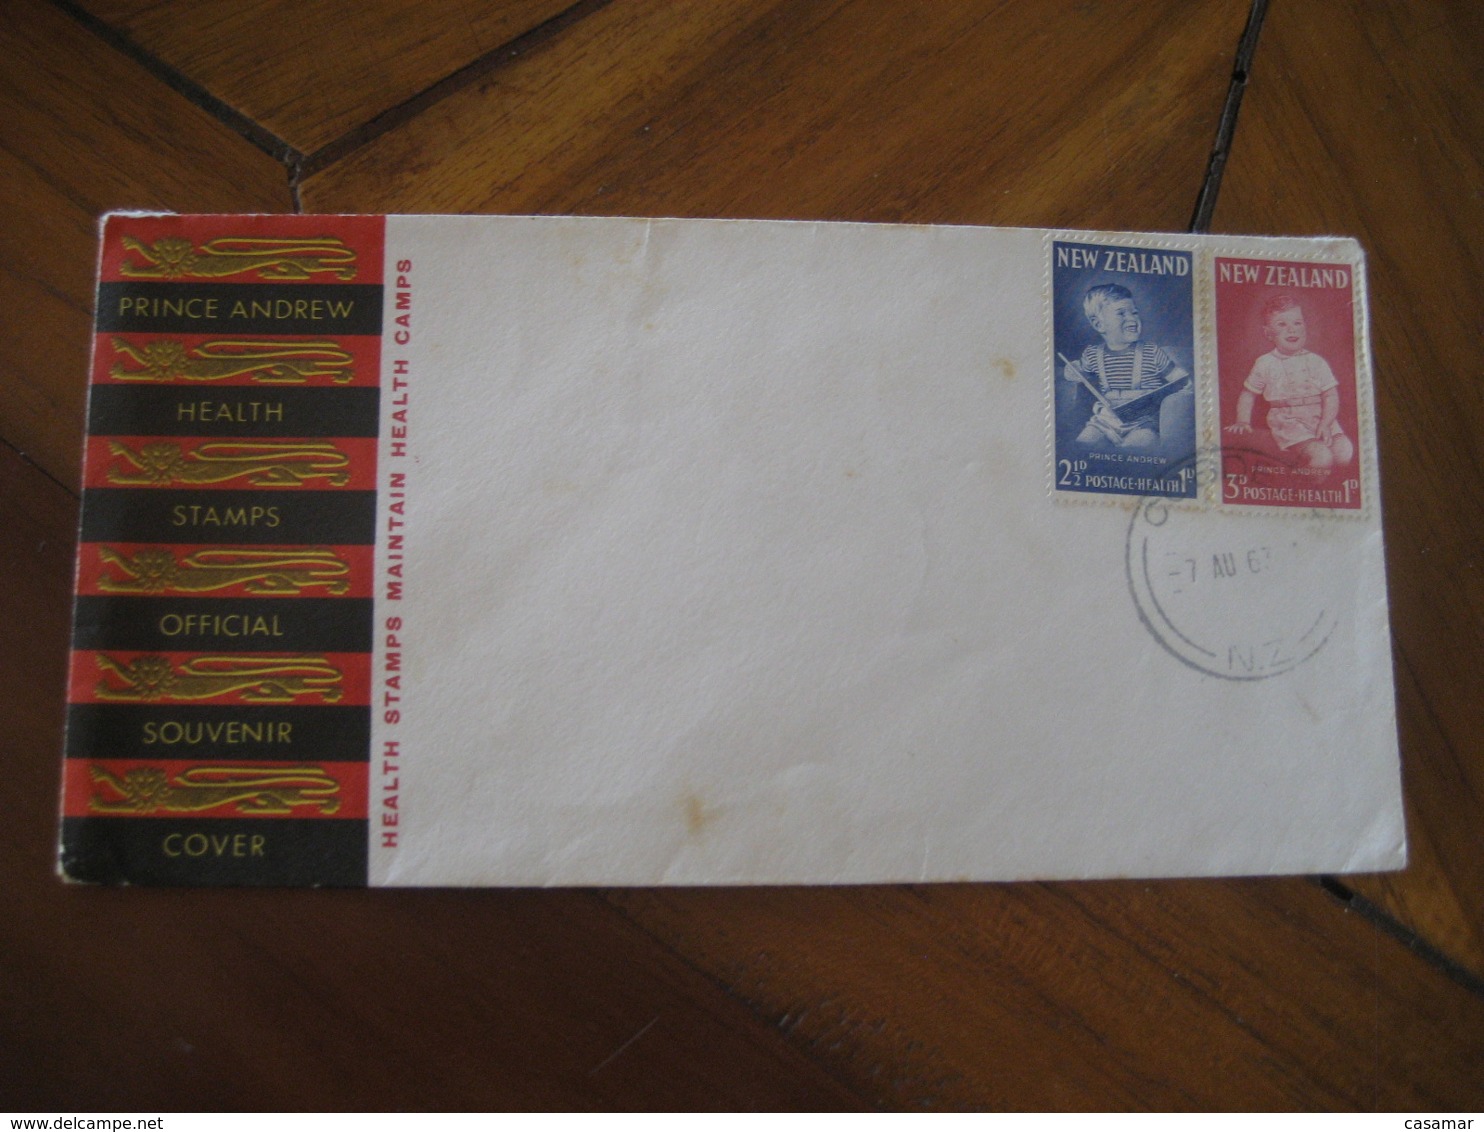 Prince Andrew 1963 Health Stamps Official Souvenir Cancel Cover NEW ZEALAND - Lettres & Documents